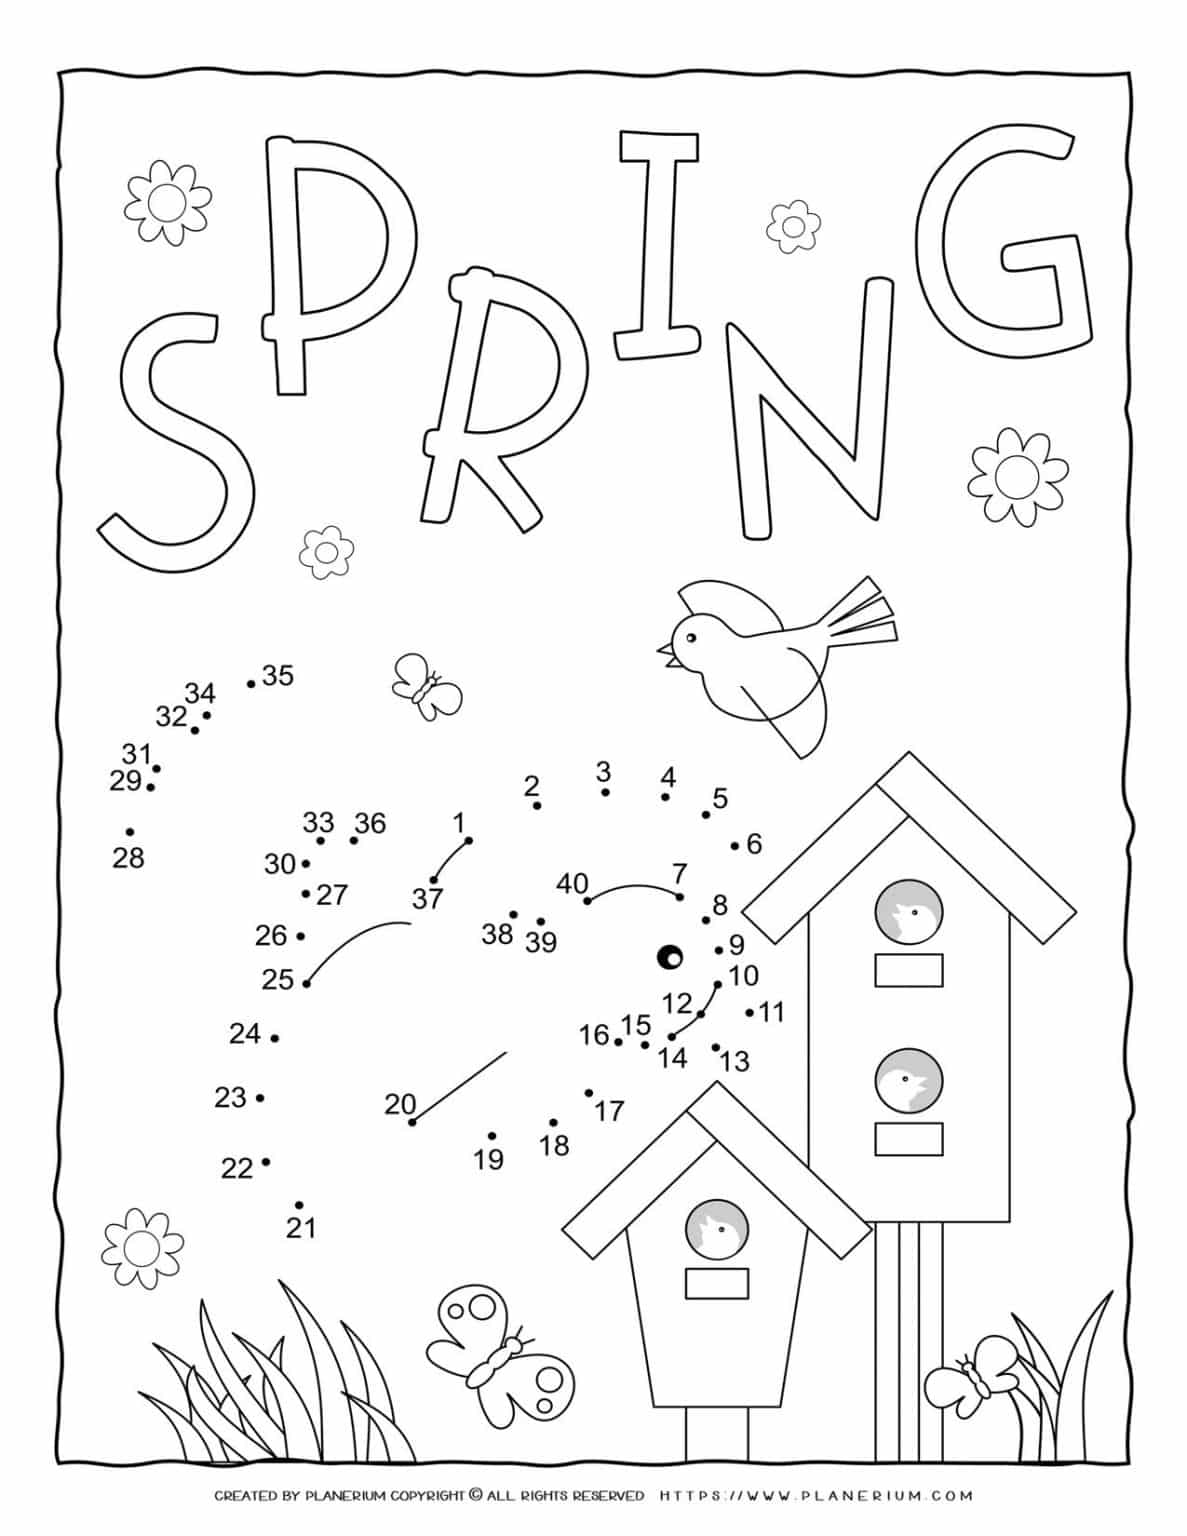 spring-connect-the-dots-planerium